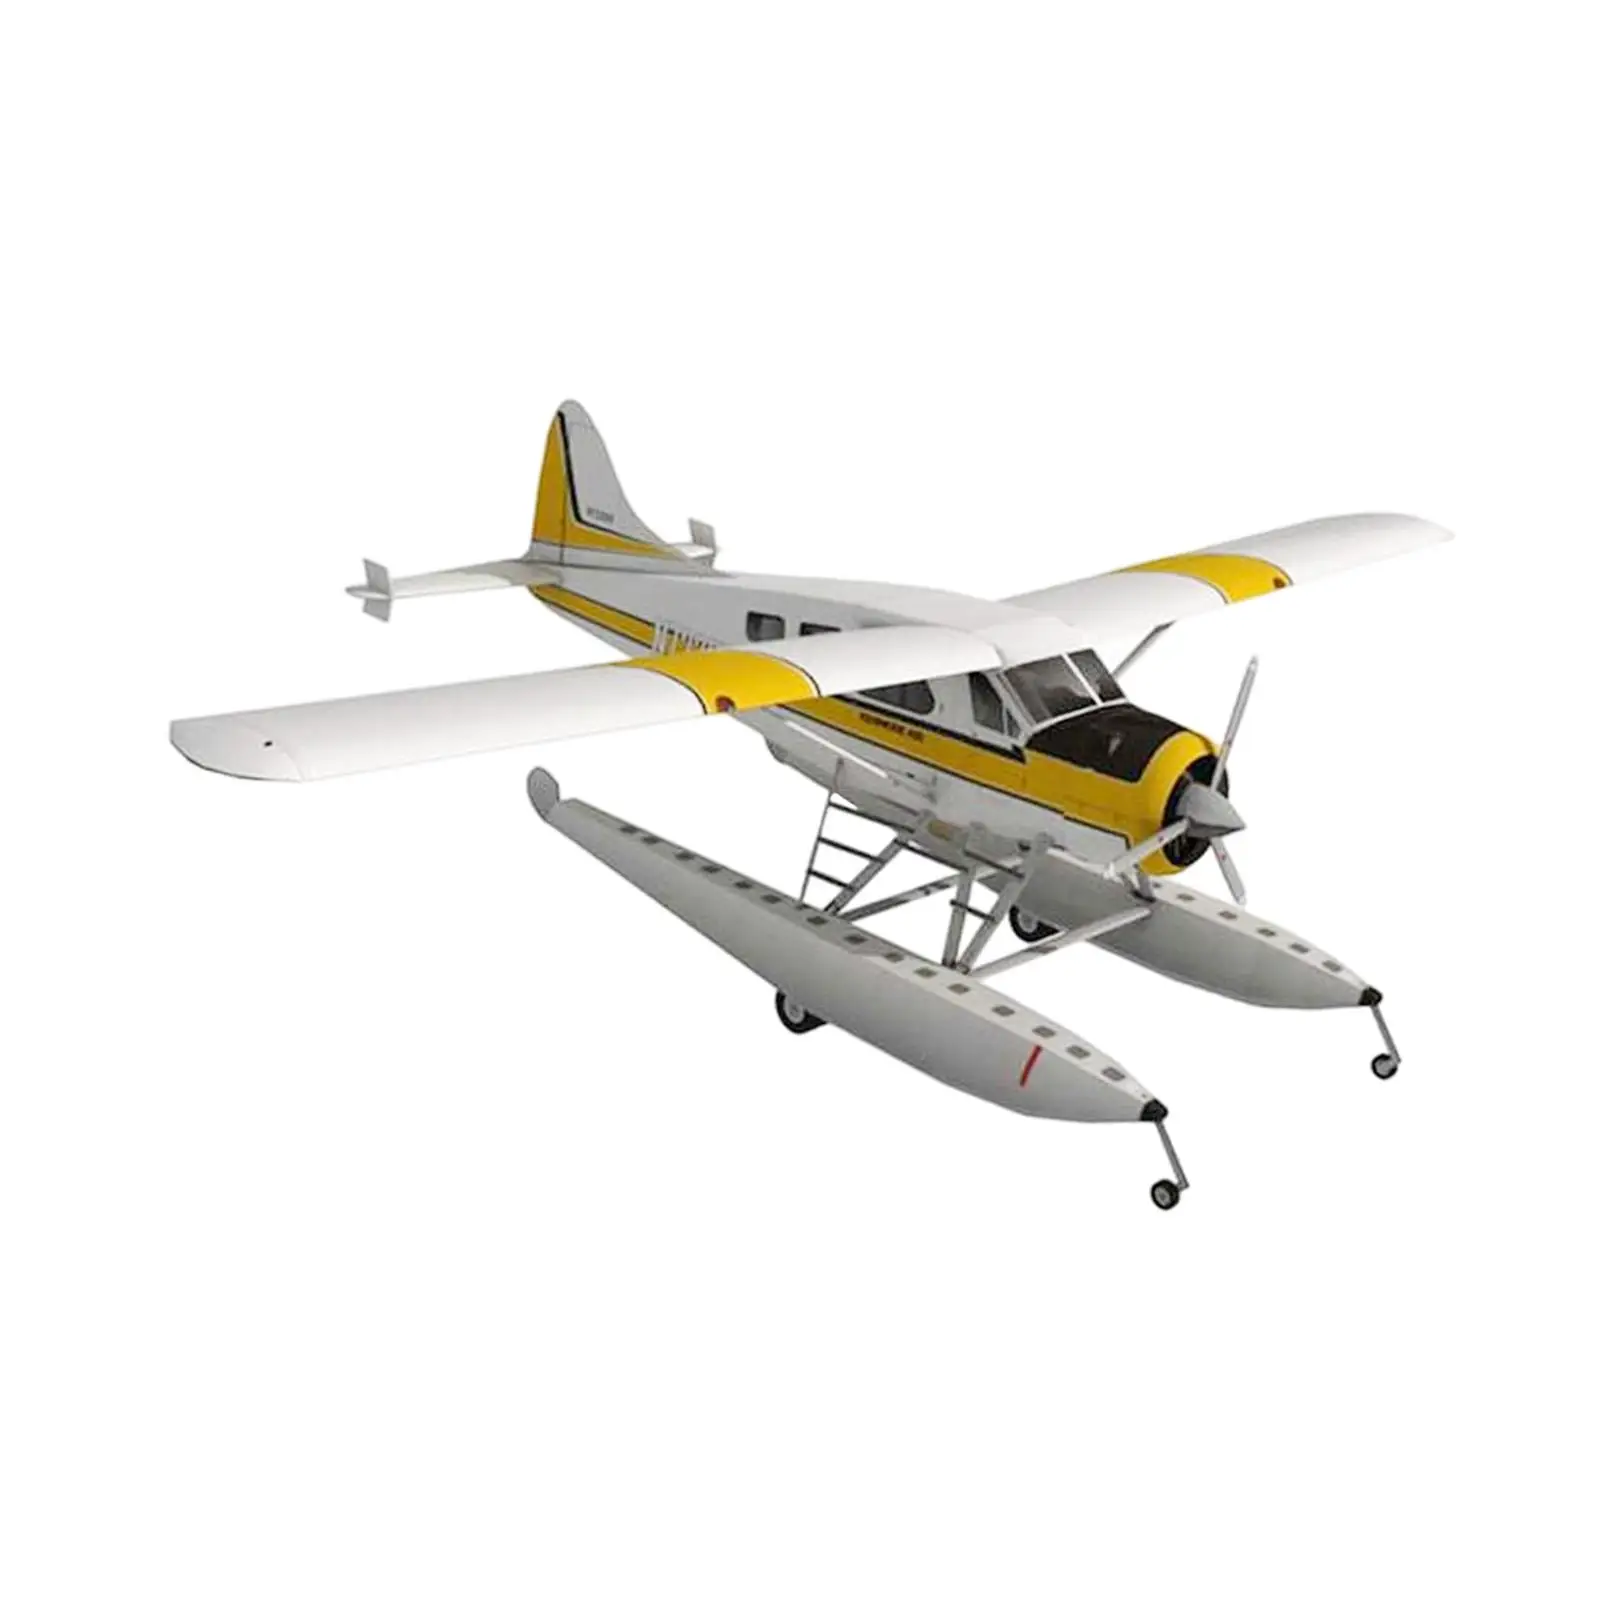 1:32 Seaplane Model Collections Desk Decoration Paper Airplane Model Kits 3D Puzzle for Men Women Adults Kids Gifts